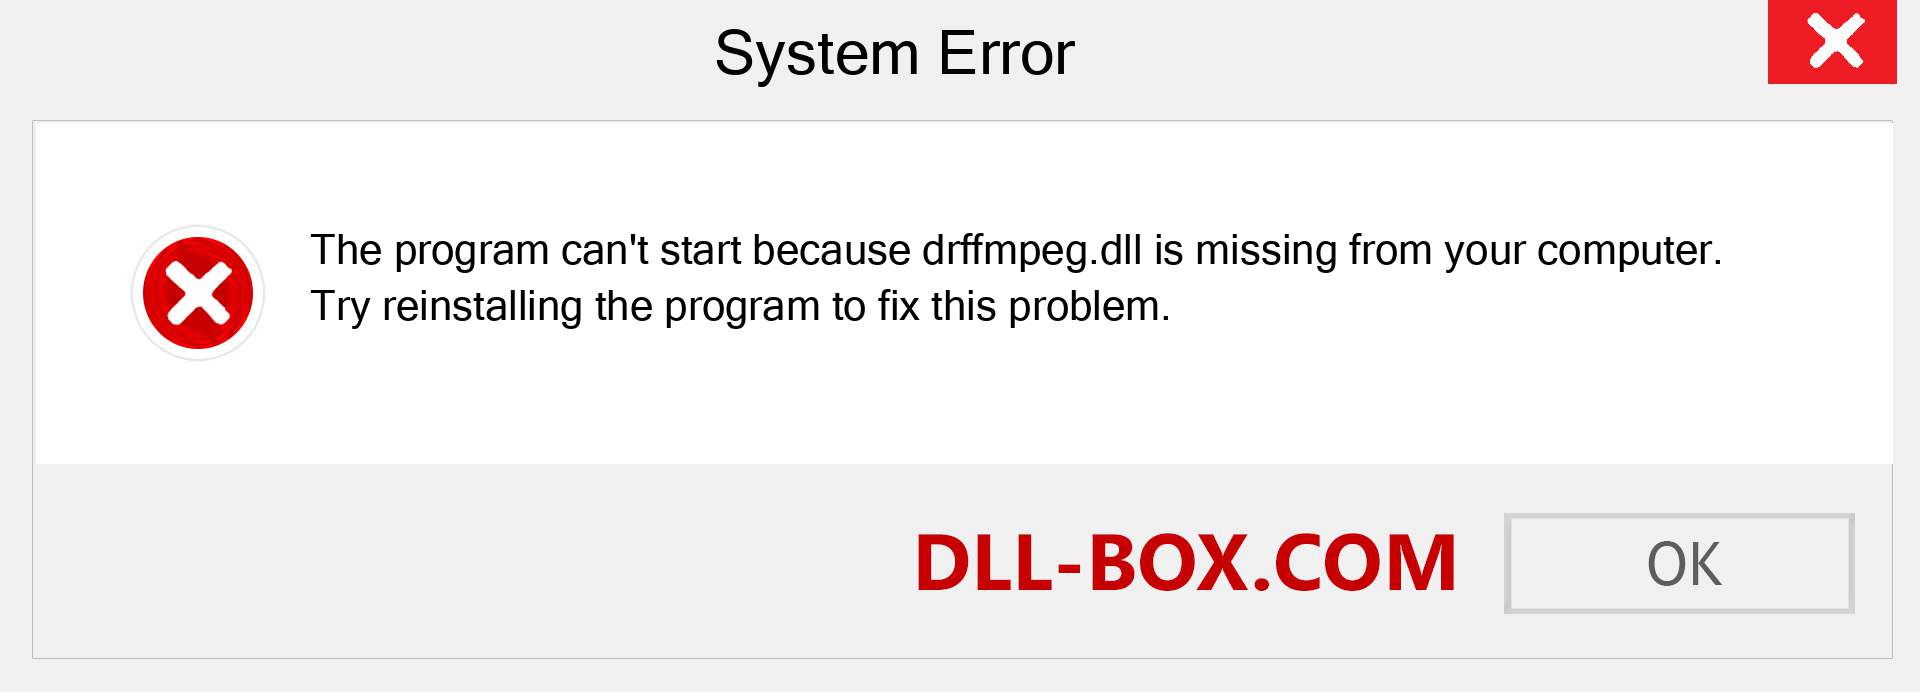  drffmpeg.dll file is missing?. Download for Windows 7, 8, 10 - Fix  drffmpeg dll Missing Error on Windows, photos, images